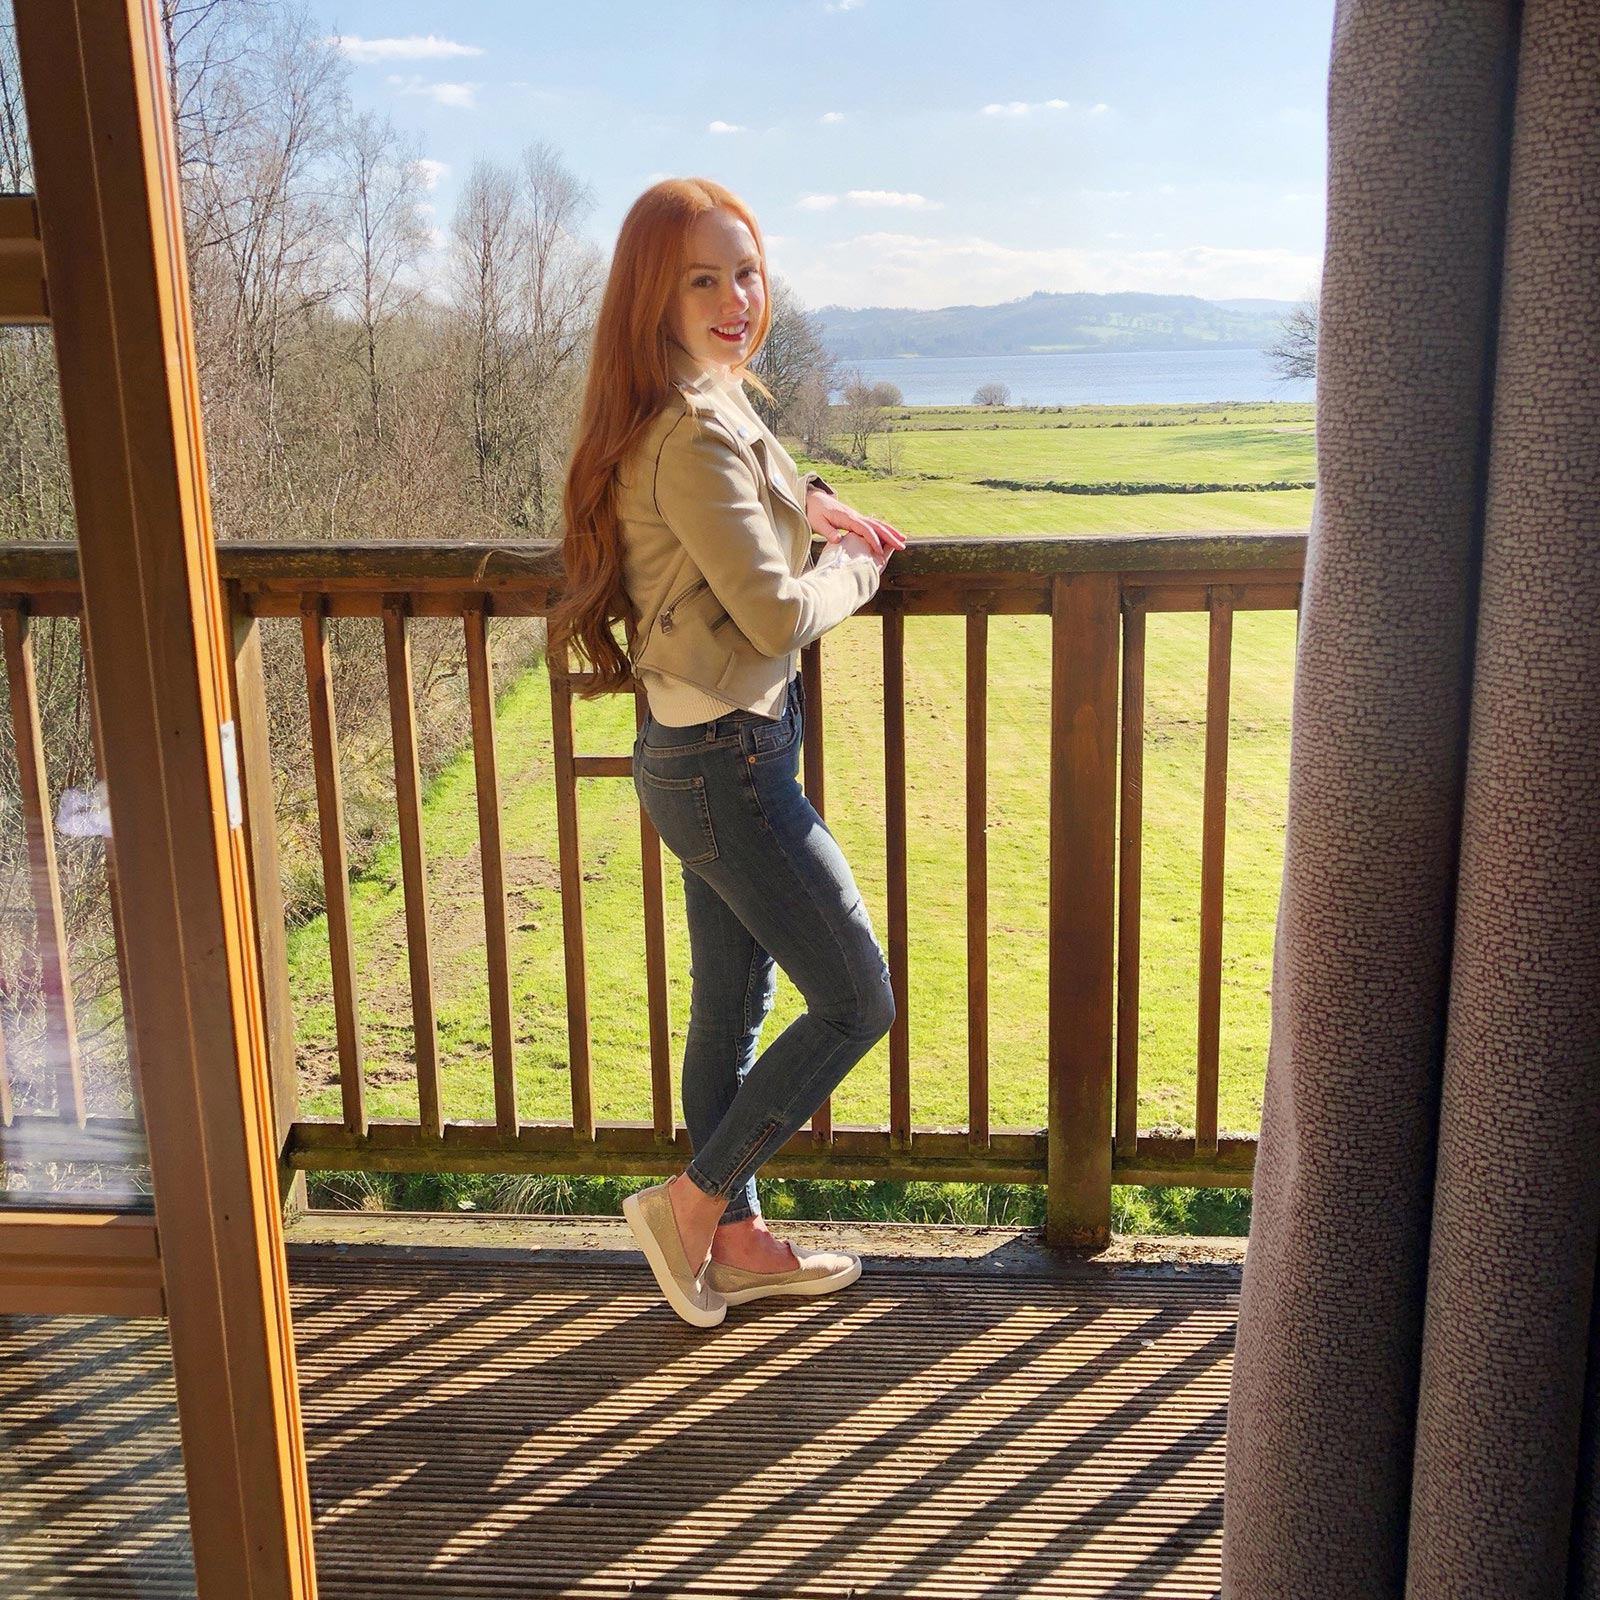 Our stay at Loch Lomond Waterfront Lodges, Scotland